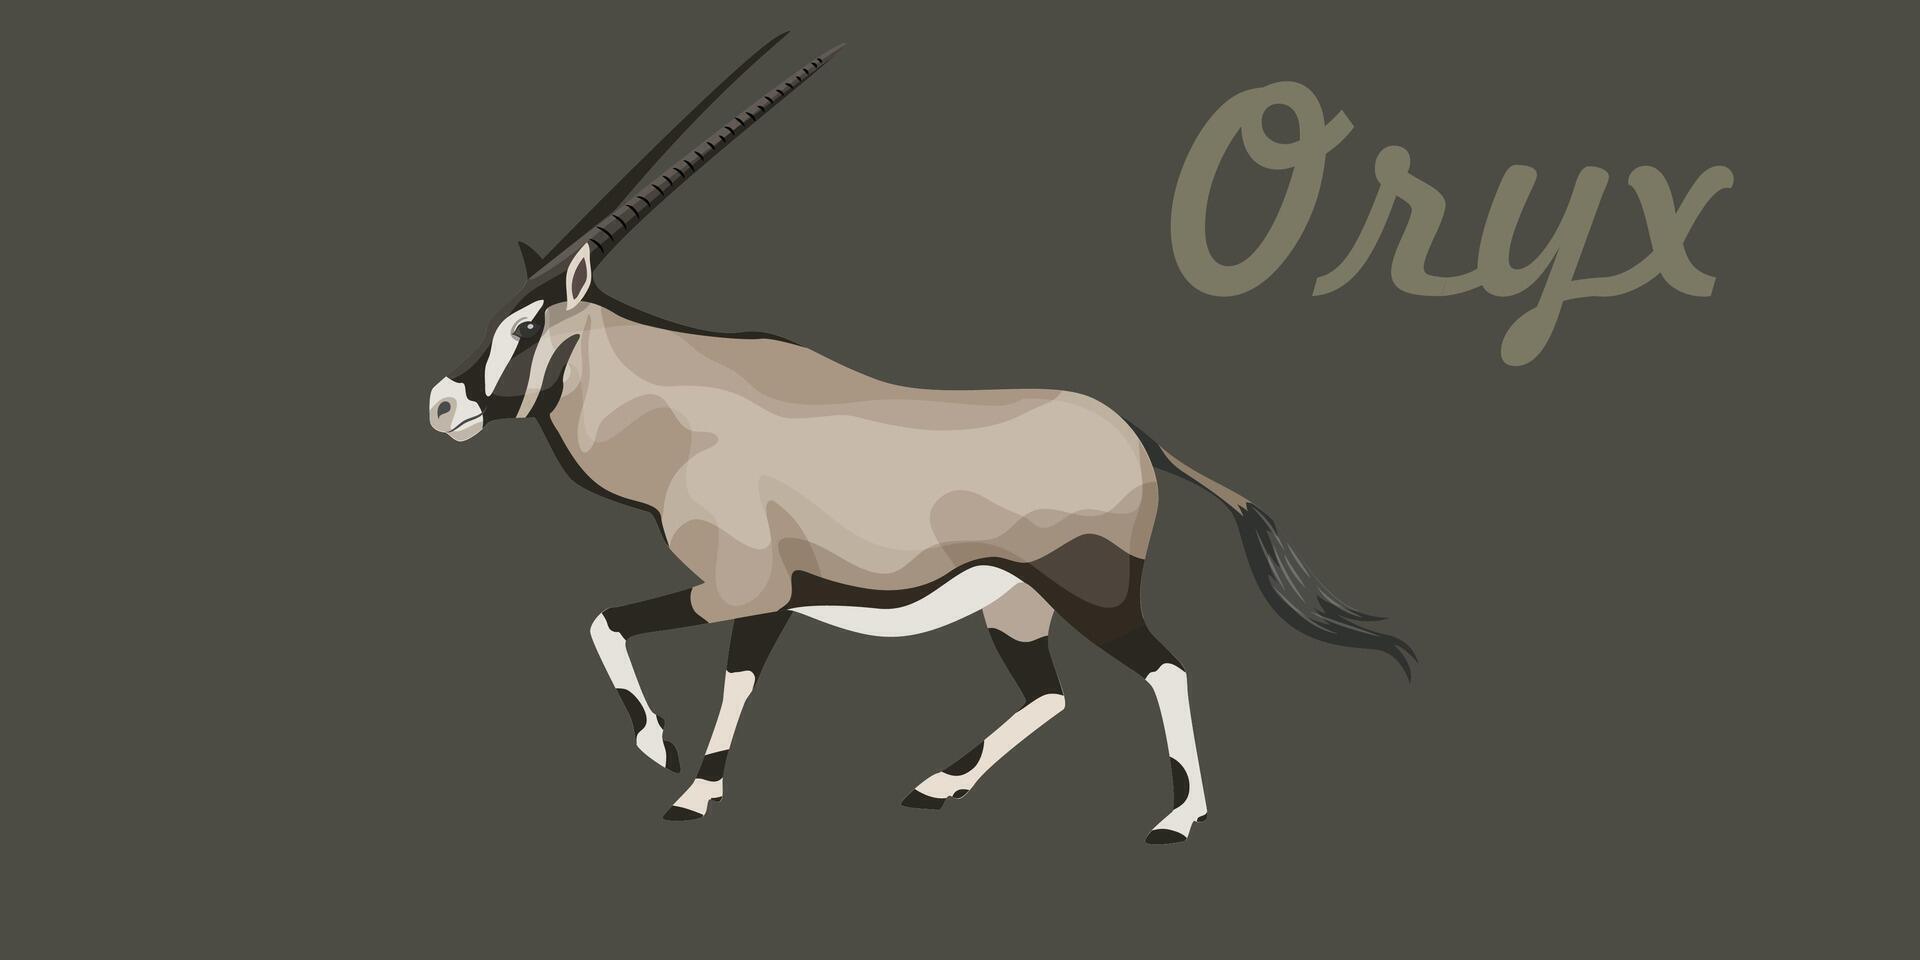 Oryx antelope vector illustration. long straight horns and dark markings. stand up and walk. Desert animal conservation.